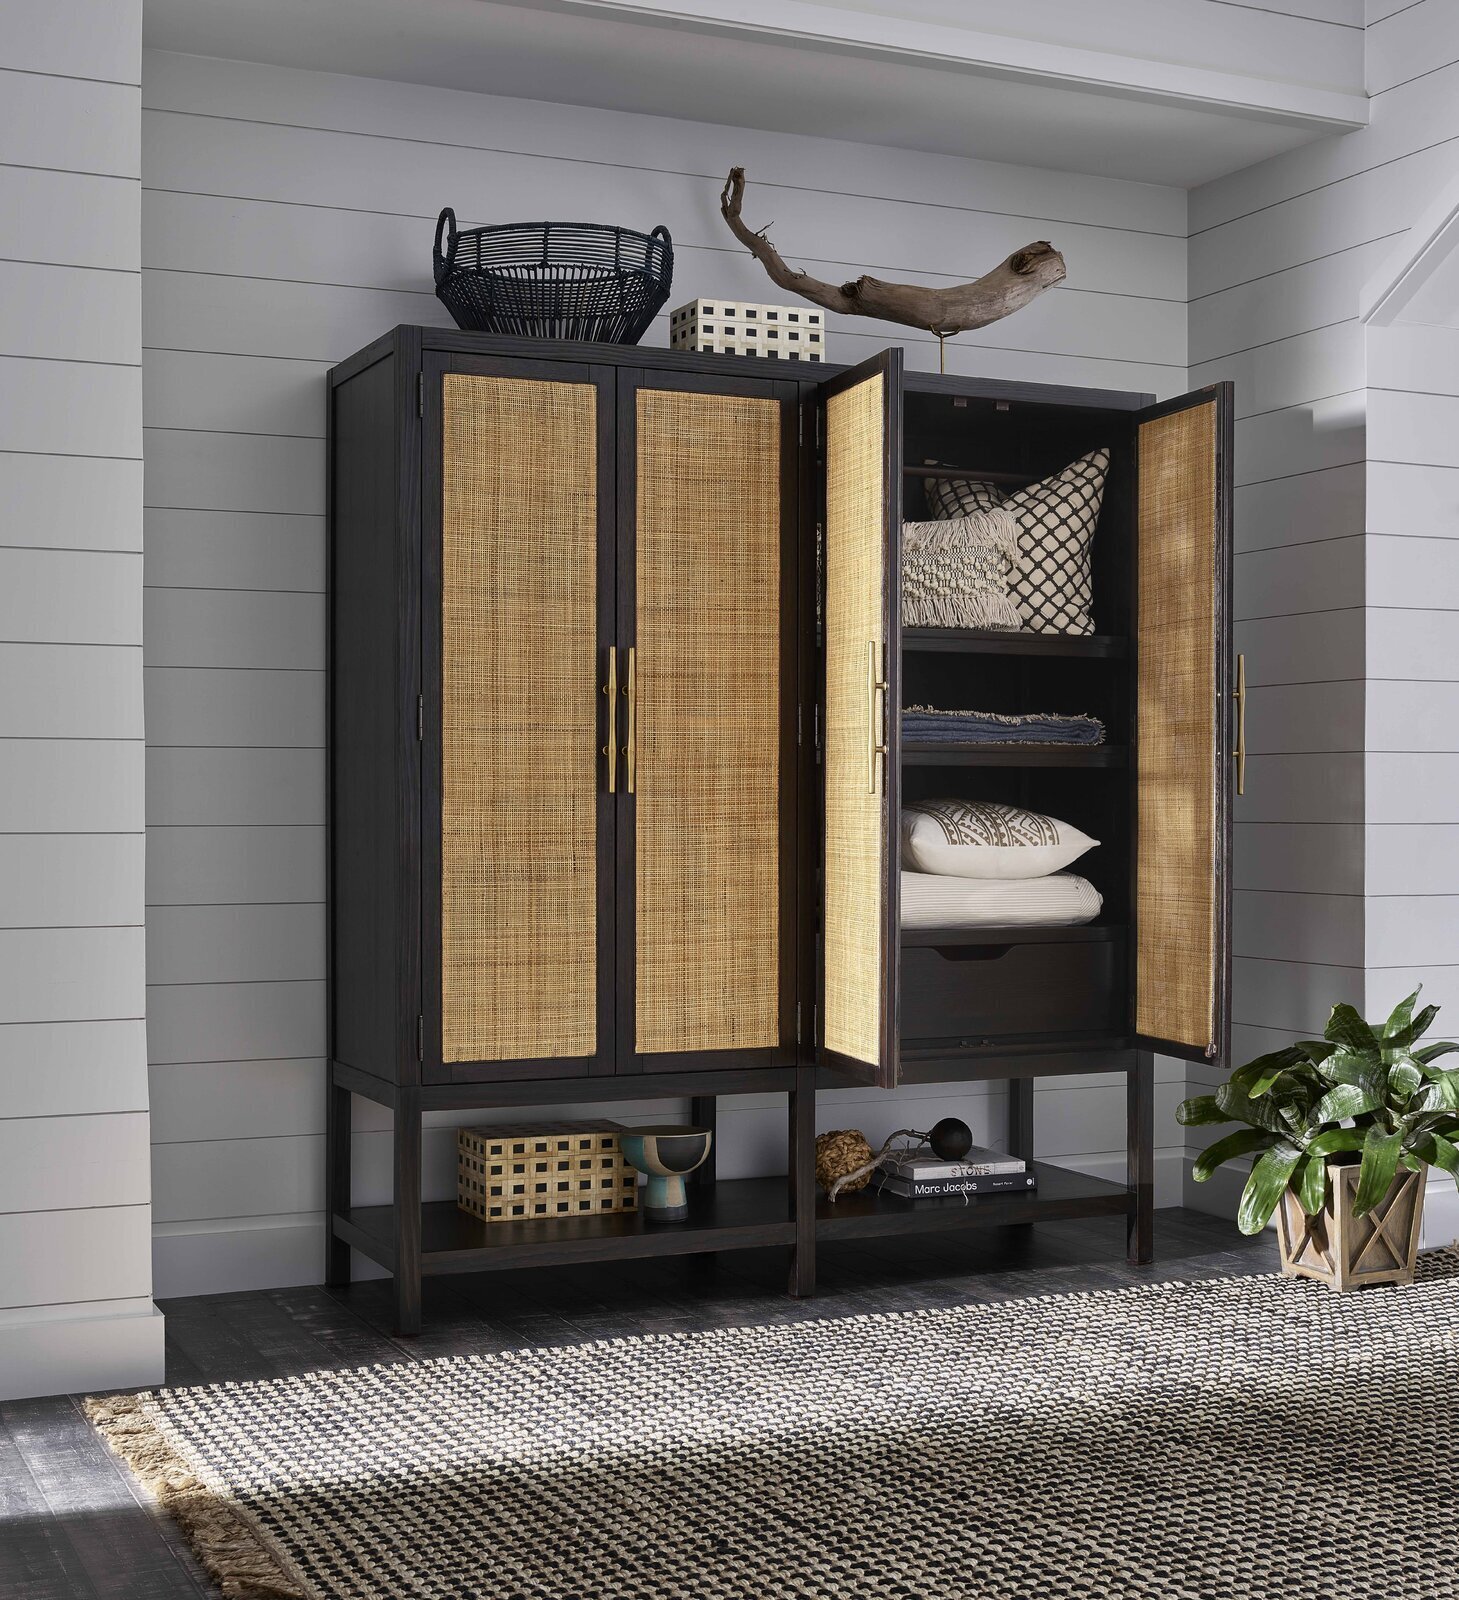 Large storage armoire with shelves